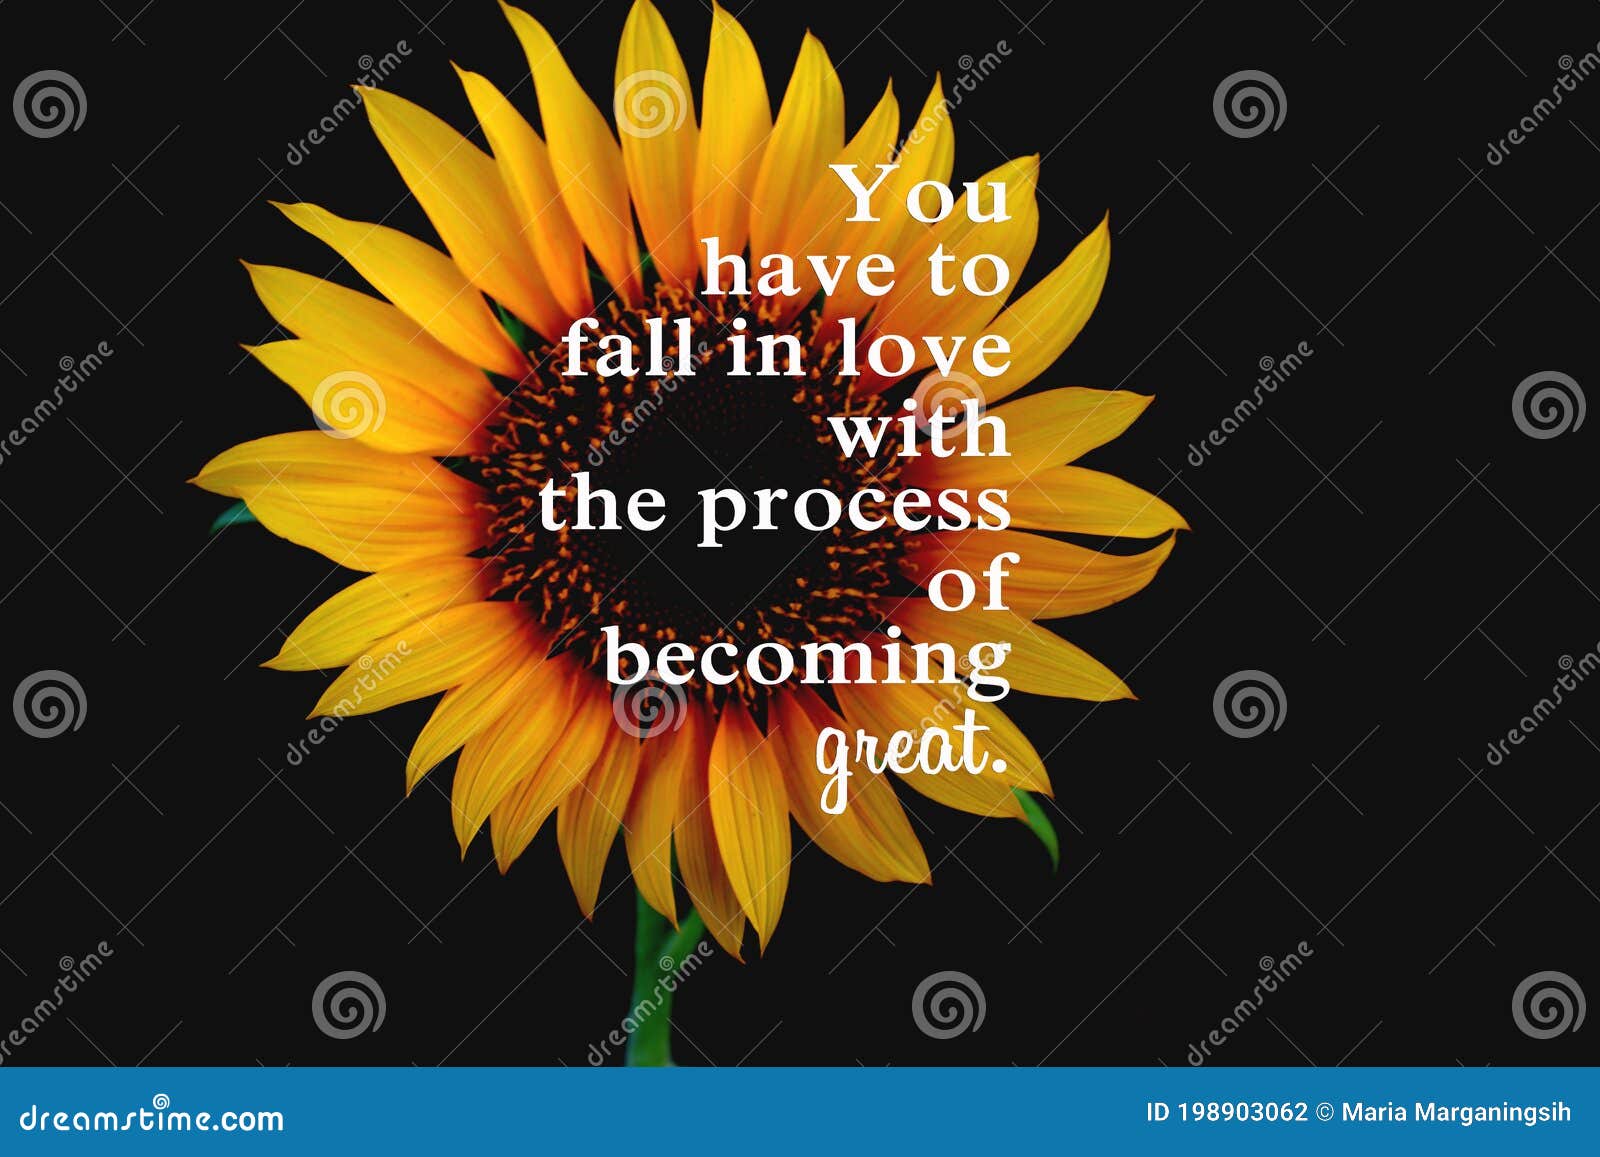 126 Fall Love Quote Photos Free Royalty Free Stock Photos From Dreamstime